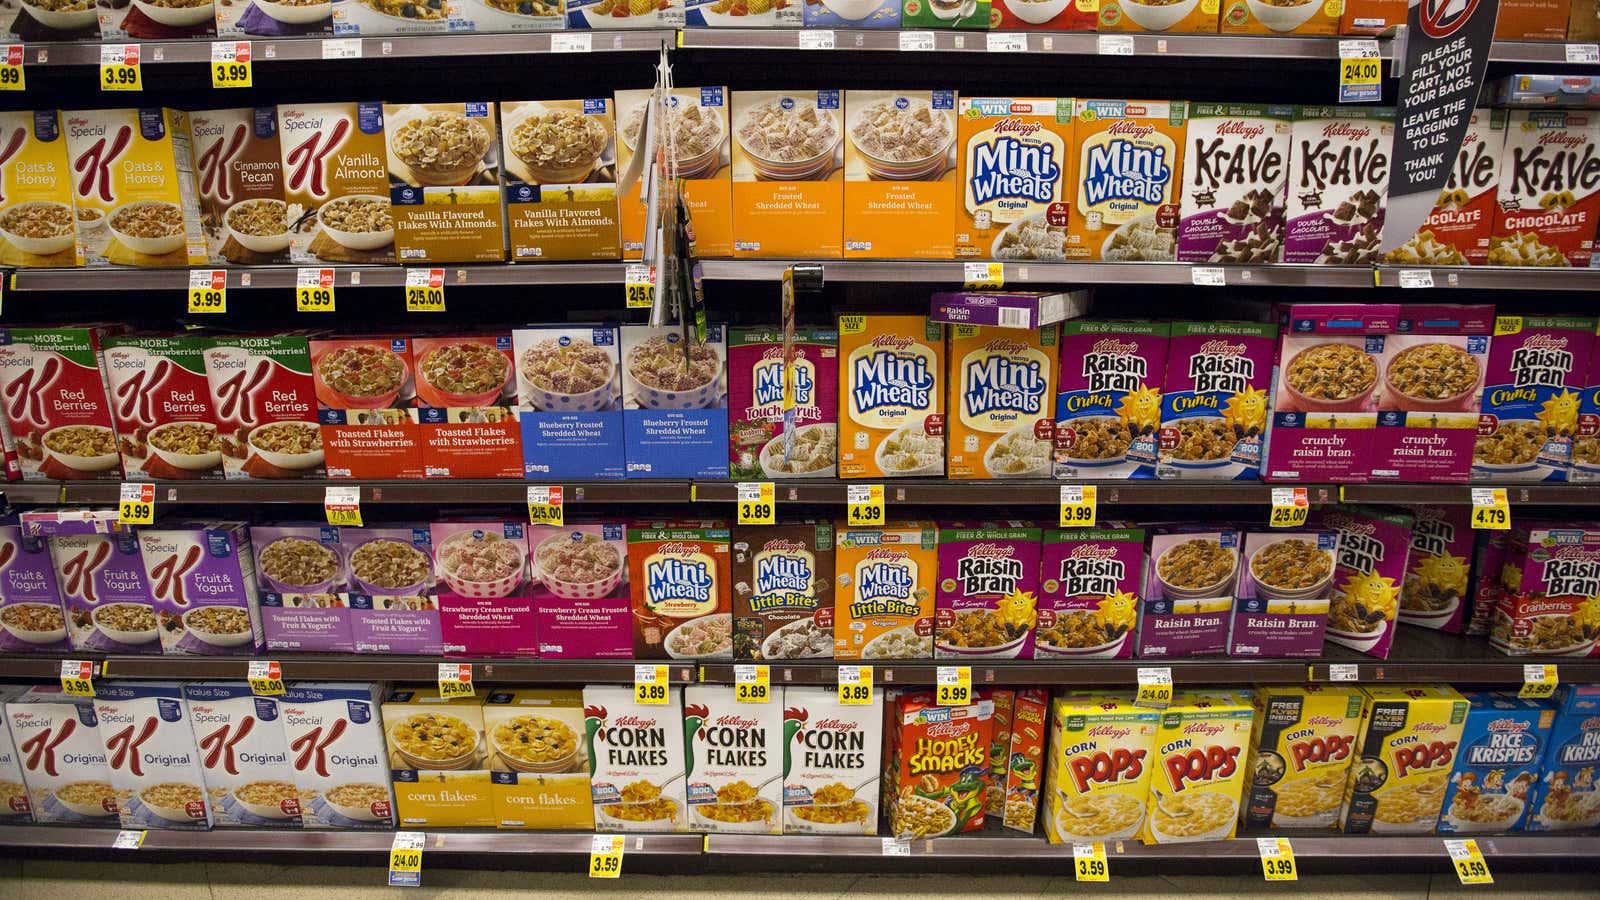 Kellogg’s hopes to fill store racks like this in West Africa soon.